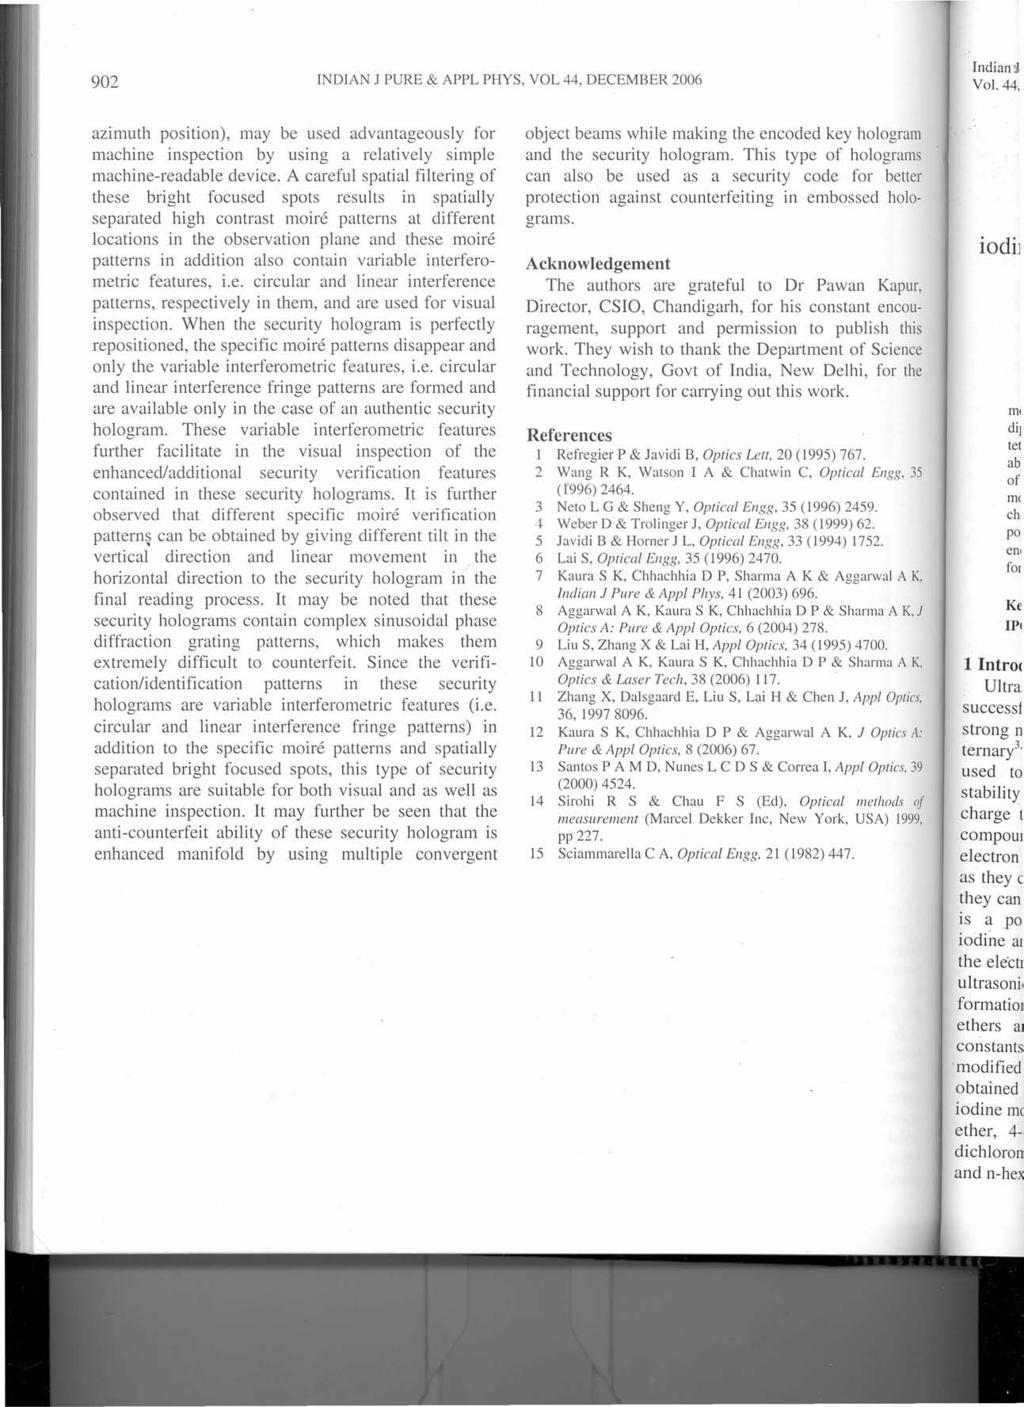 902 INorAN J PURE & APPL PHYS, VOL 44, DECEMBER 2006 azimuth position), may be used advantageously for machine inspection by using a relatively simple machine-readable device.